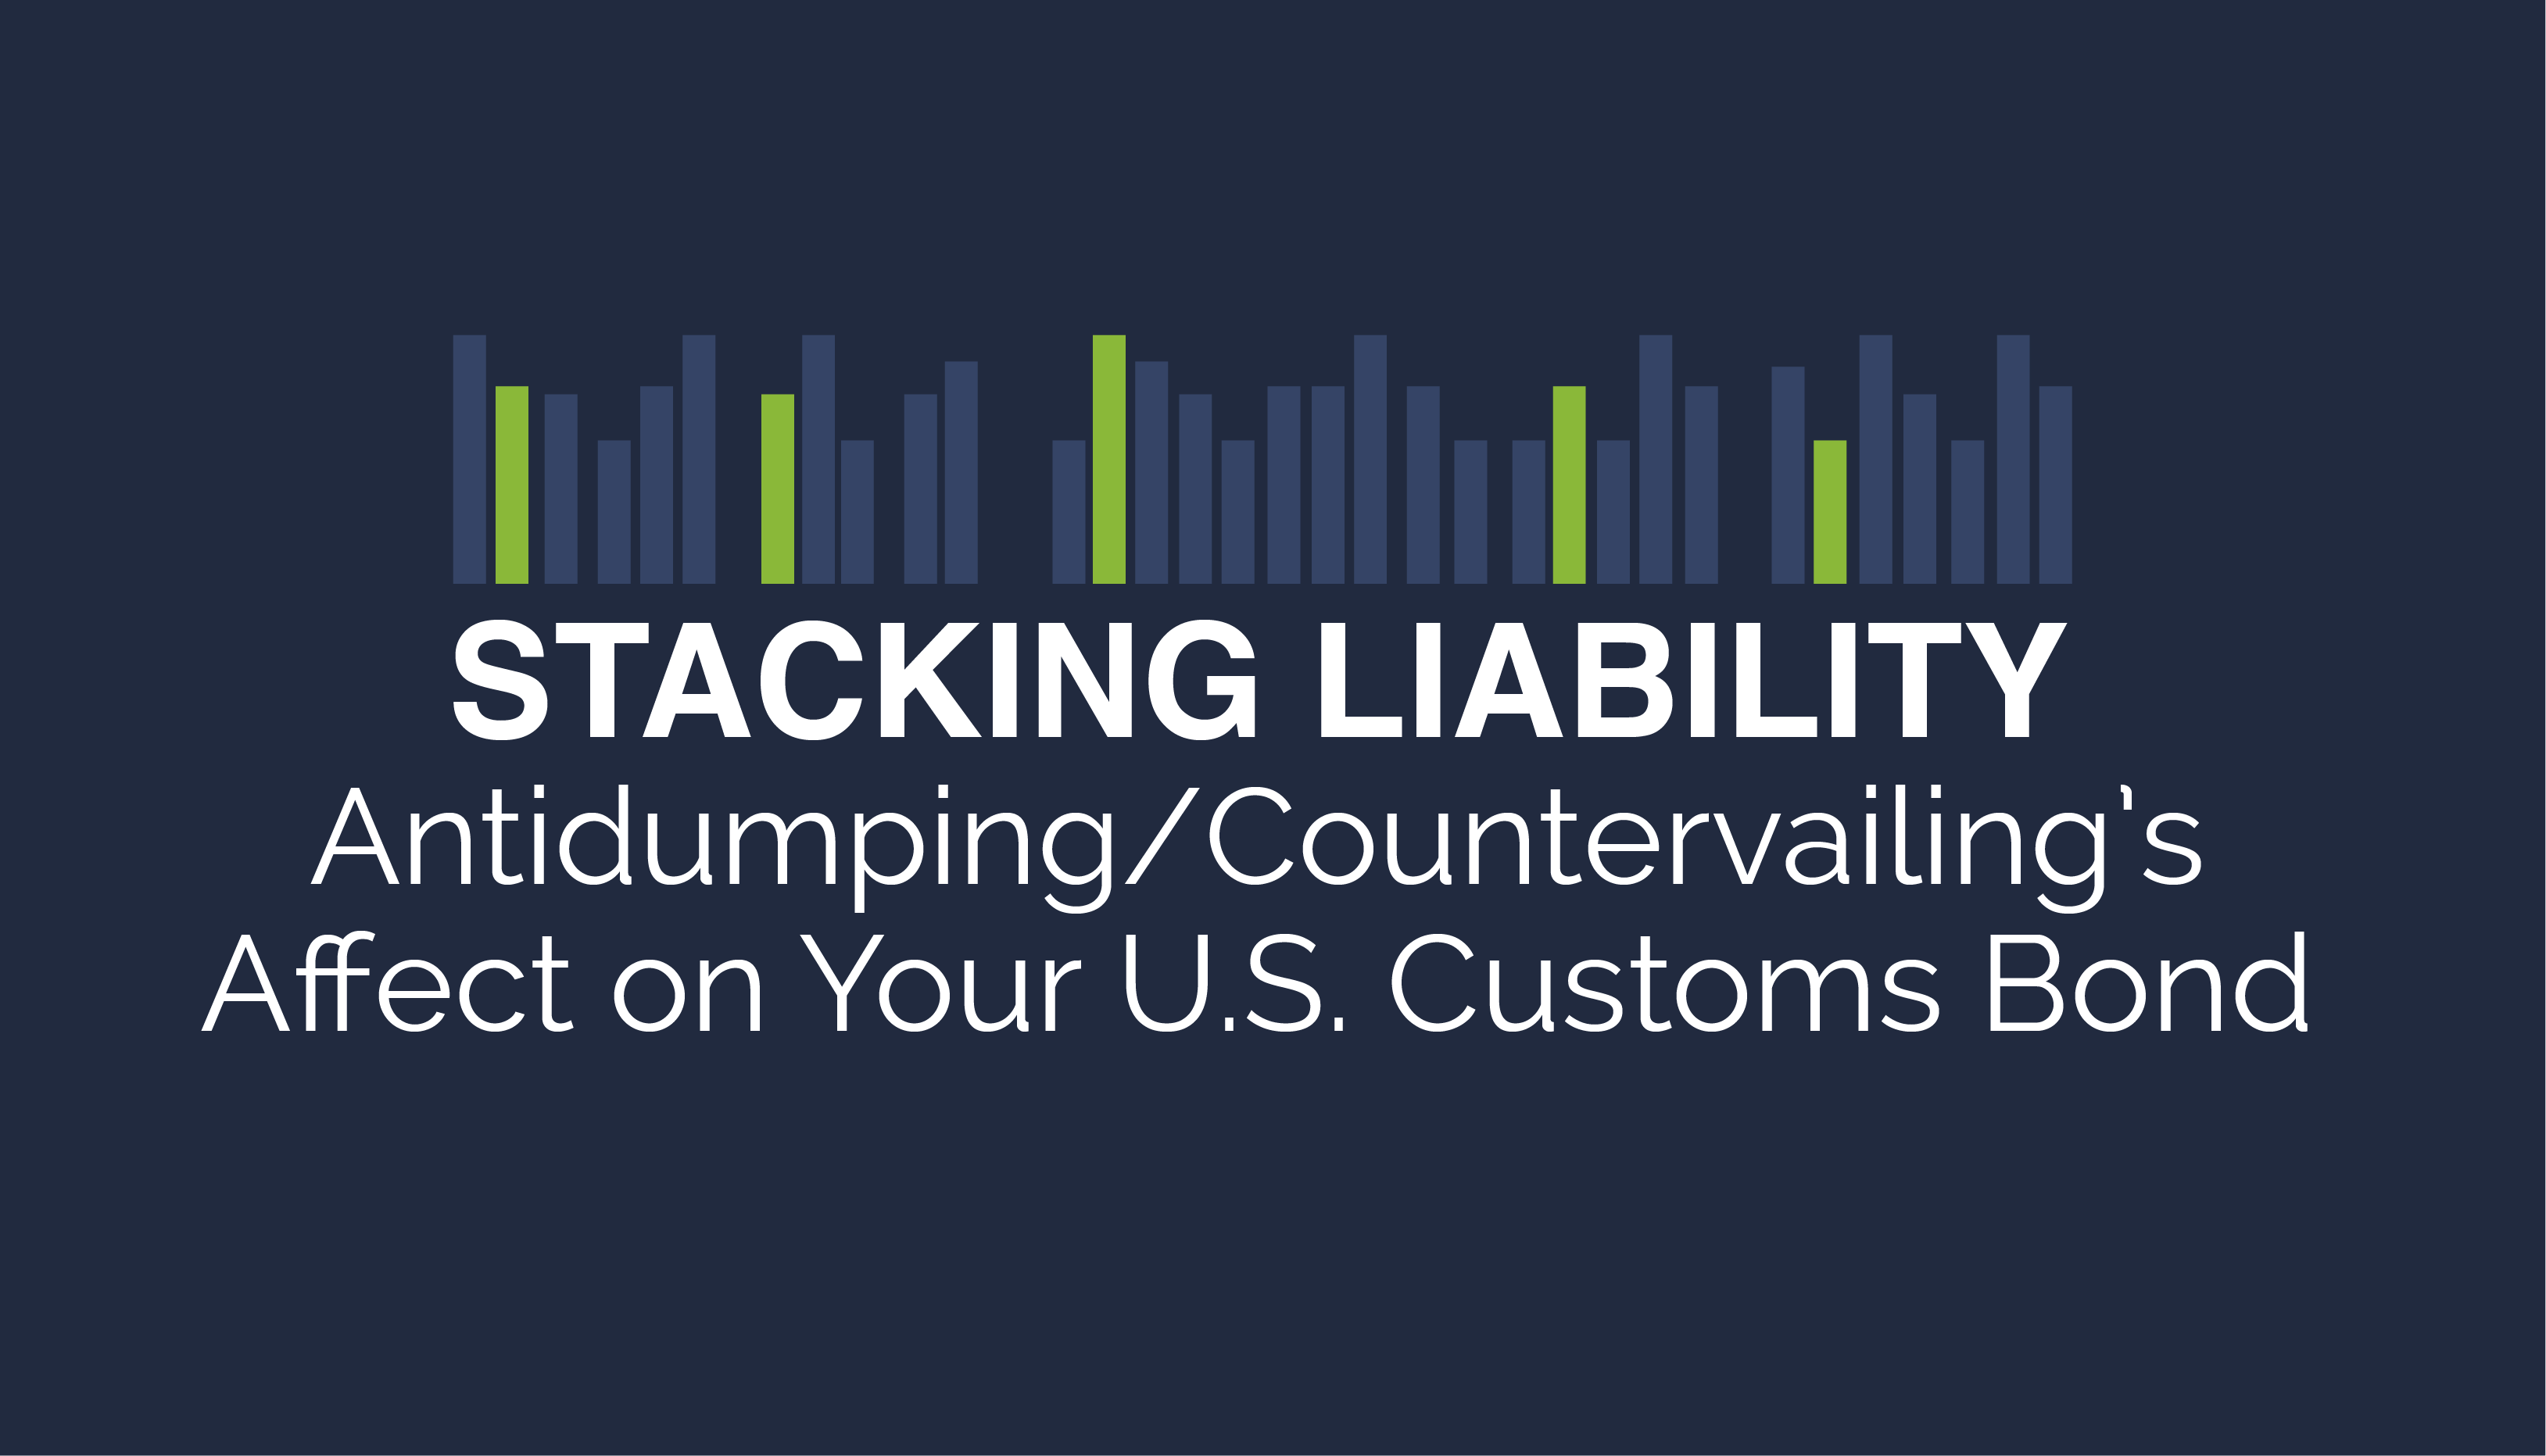 TRG explains how antidumping impacts the stacking liability on your Customs bond.